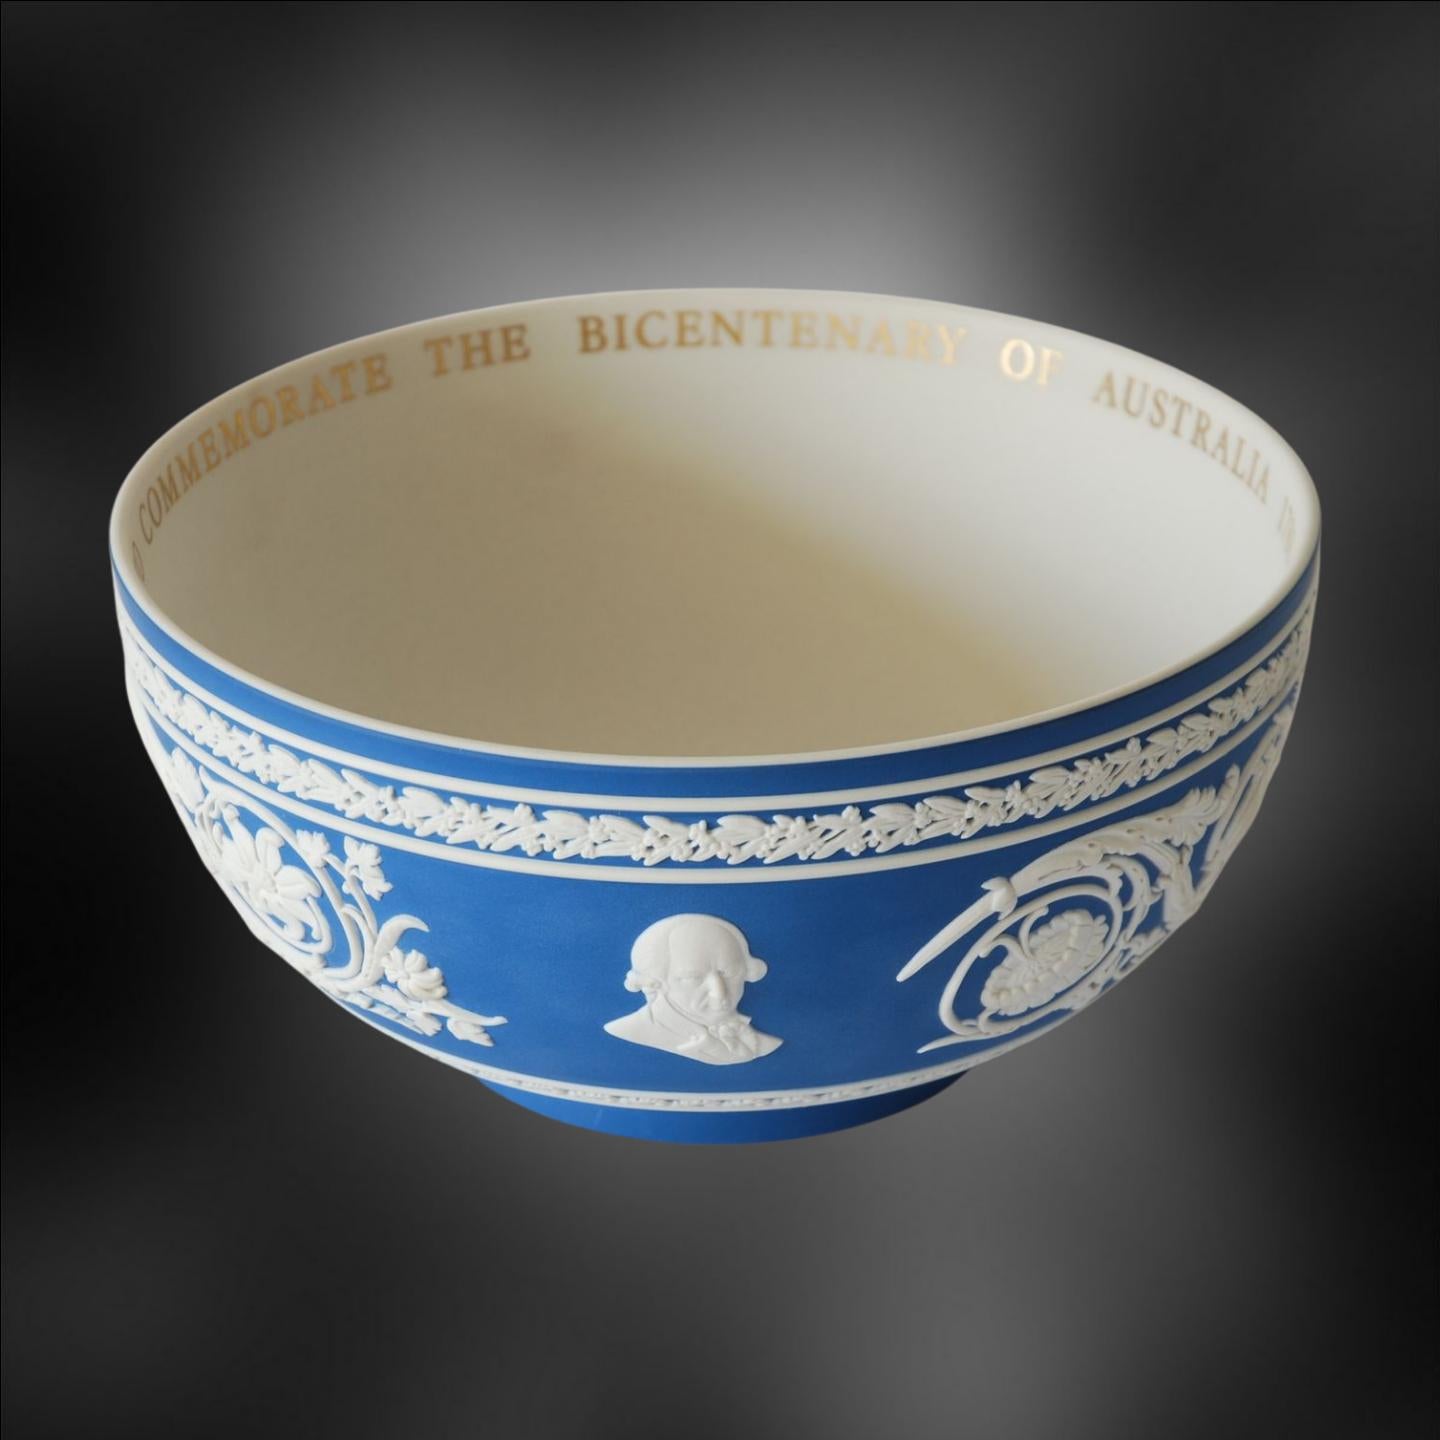 In Royal Blue dip; a colour normally reserved for Coronation commemoratives. One of only fifty made; made to mark the bicentenary of the foundation of the colony at Botany Bay.

The bowl features portraits of Captain James Cook and Commodore